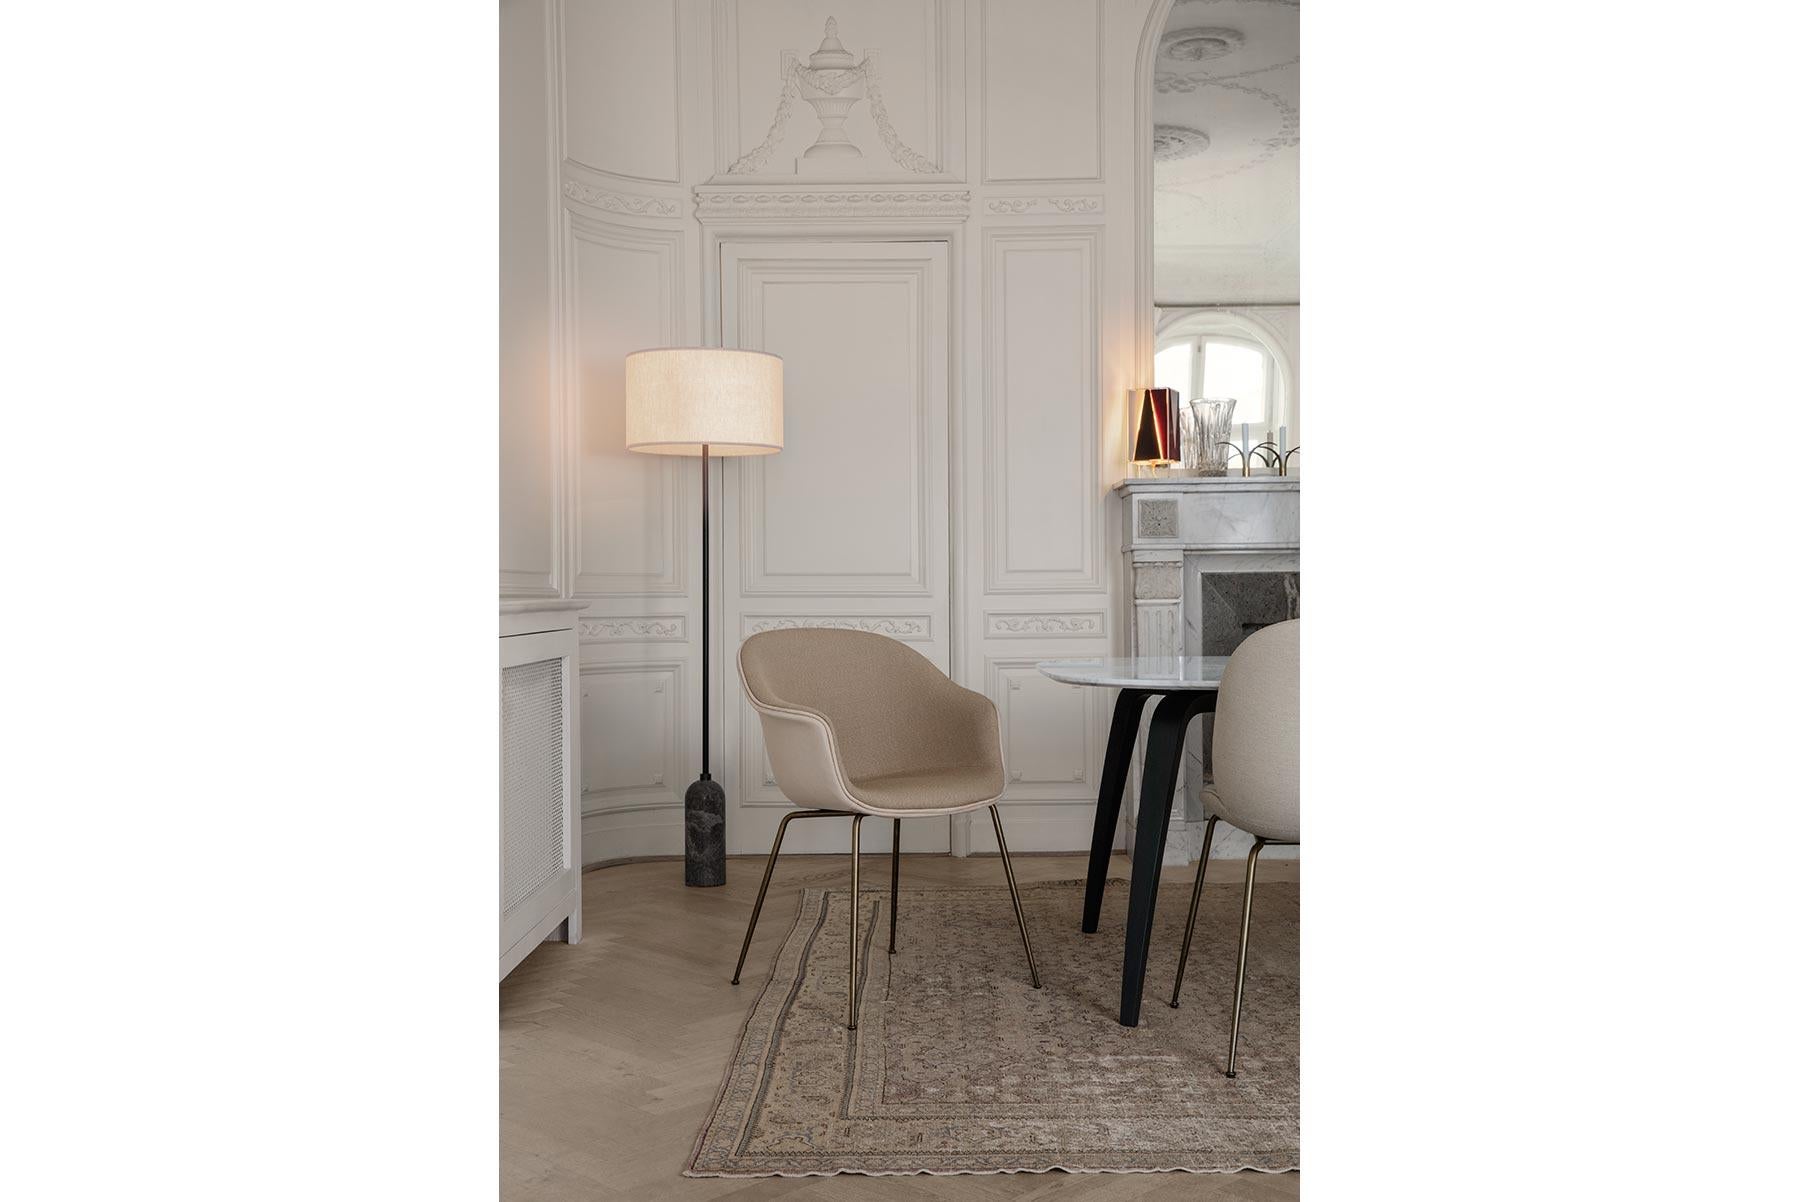 The bat dining chair, designed by Danish-Italian design-duo GamFratesi, carries strong references to the interesting characteristics of bats, with its inviting, distinctive shell reminiscent of the shape of a bat’s wingspan. Balancing between the